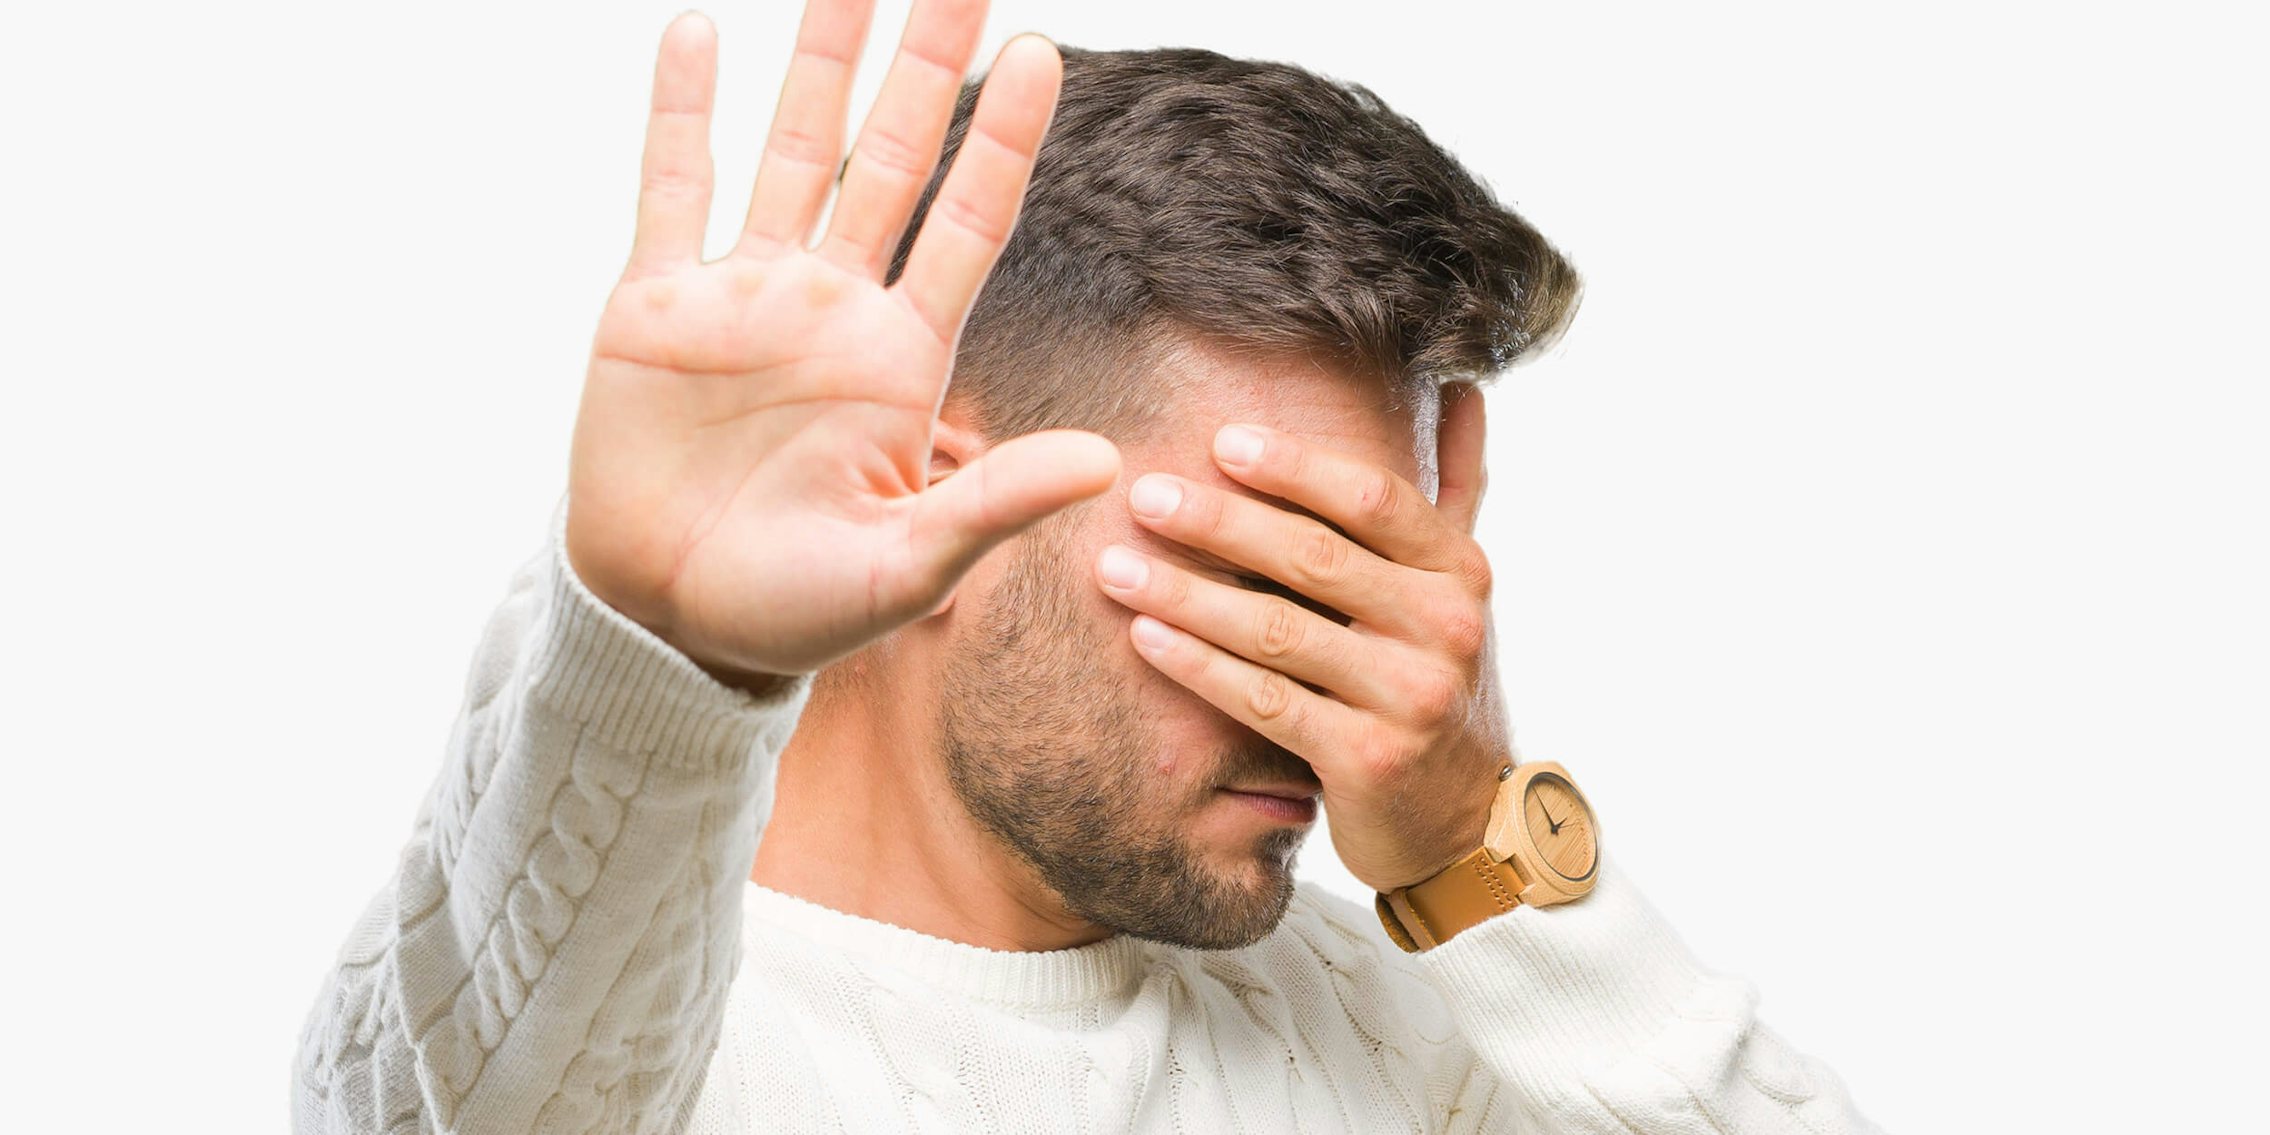 man covering eyes, placing hand up to stop